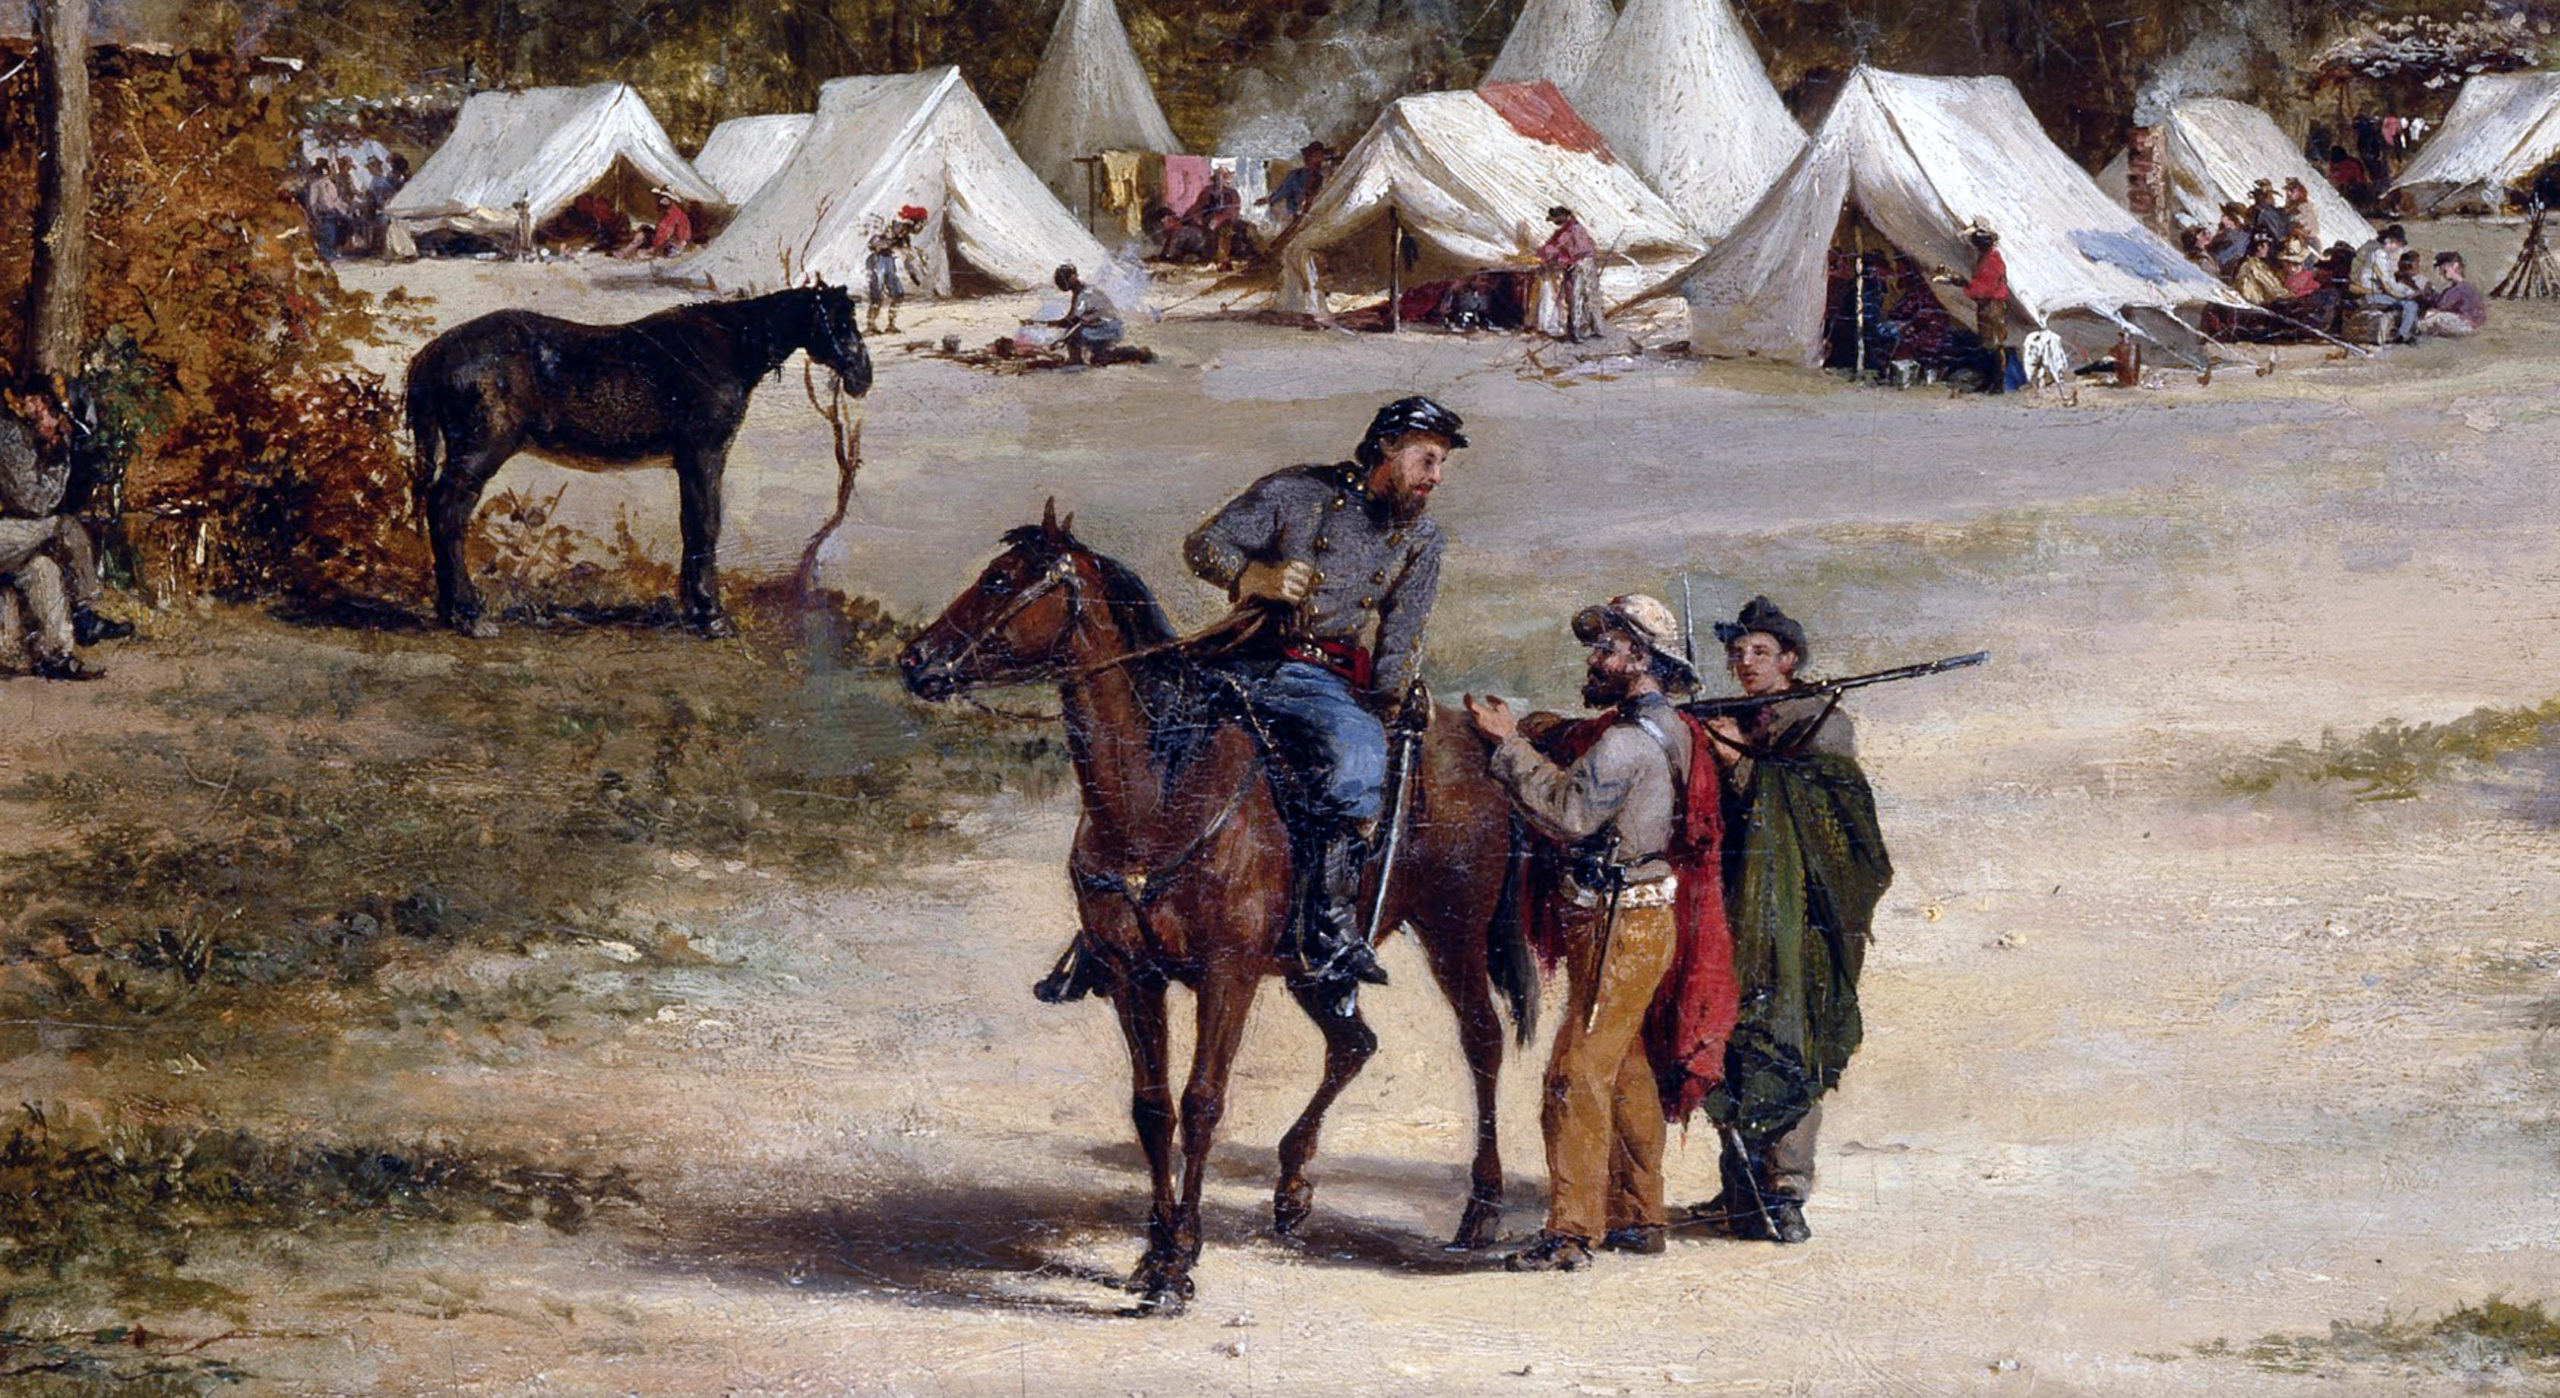 Conrad Wise Chapman, <em>The Fifty-Ninth Virginia Infantry—Wise’s Brigade</em> (detail with Colonel William B. Tabb), c. 1867, oil on canvas, 20-1/8 x 33-7/8 inches (<a href="https://www.cartermuseum.org/collection/fifty-ninth-virginia-infantry-wises-brigade-20017" target="_blank" rel="noopener">Amon Carter Museum of American Art</a>, Fort Worth)